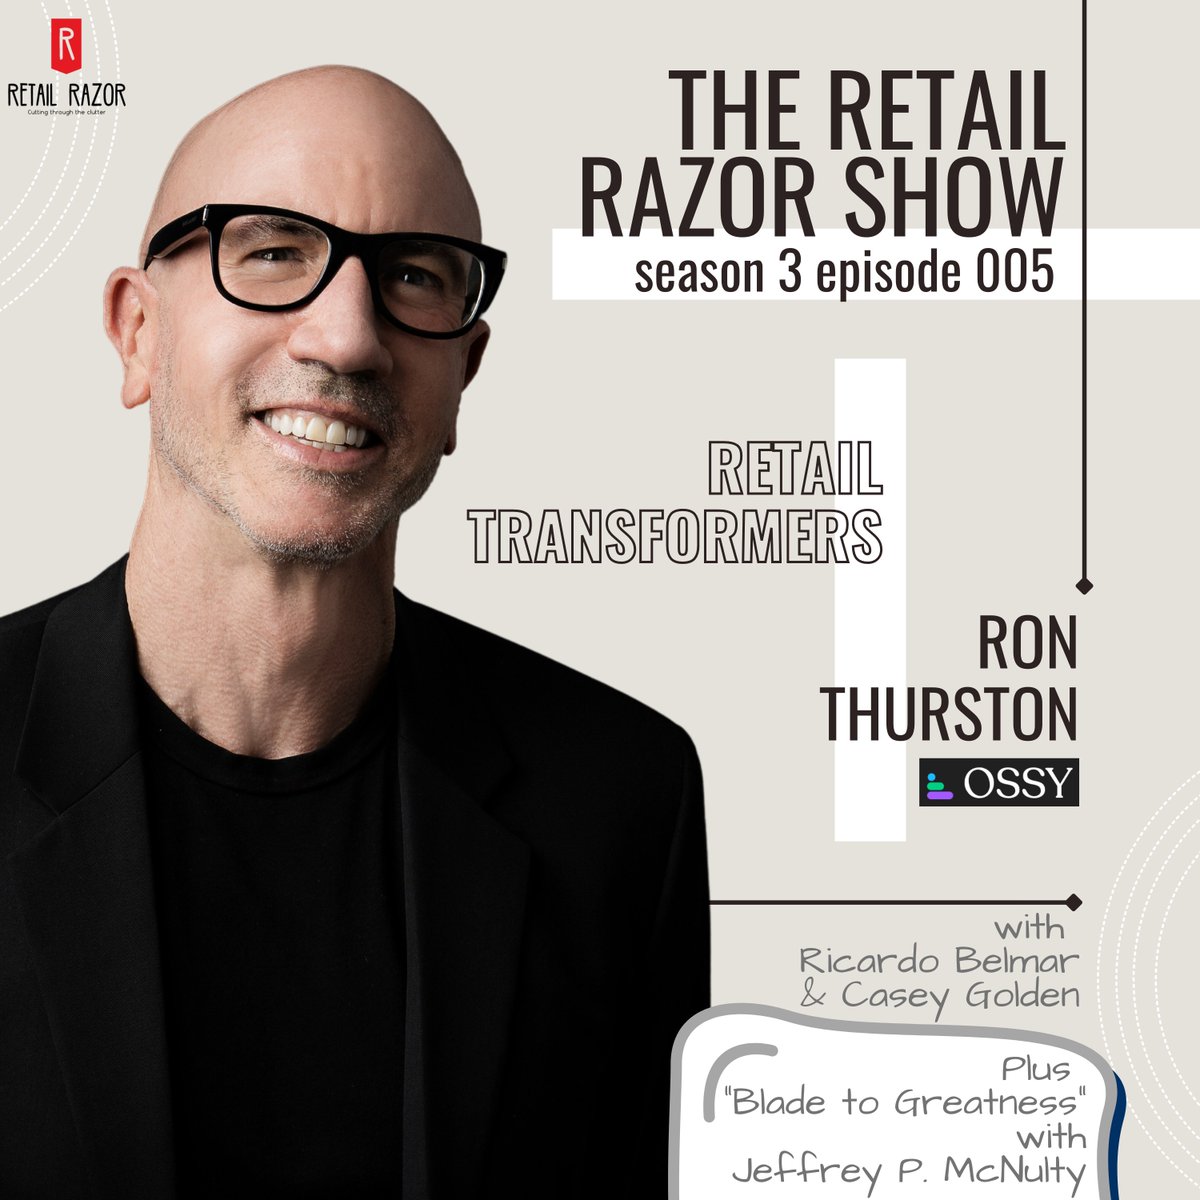 How do we change the #retail #frontlineworker hiring process in a human, respectful, & transparent way? 

Can technology help?

Ron Thurston is our lates Retail Transformer on the @RetailRazor #podcast as Ron joins @caseycgolden & me to discuss his latest venture - Ossy!